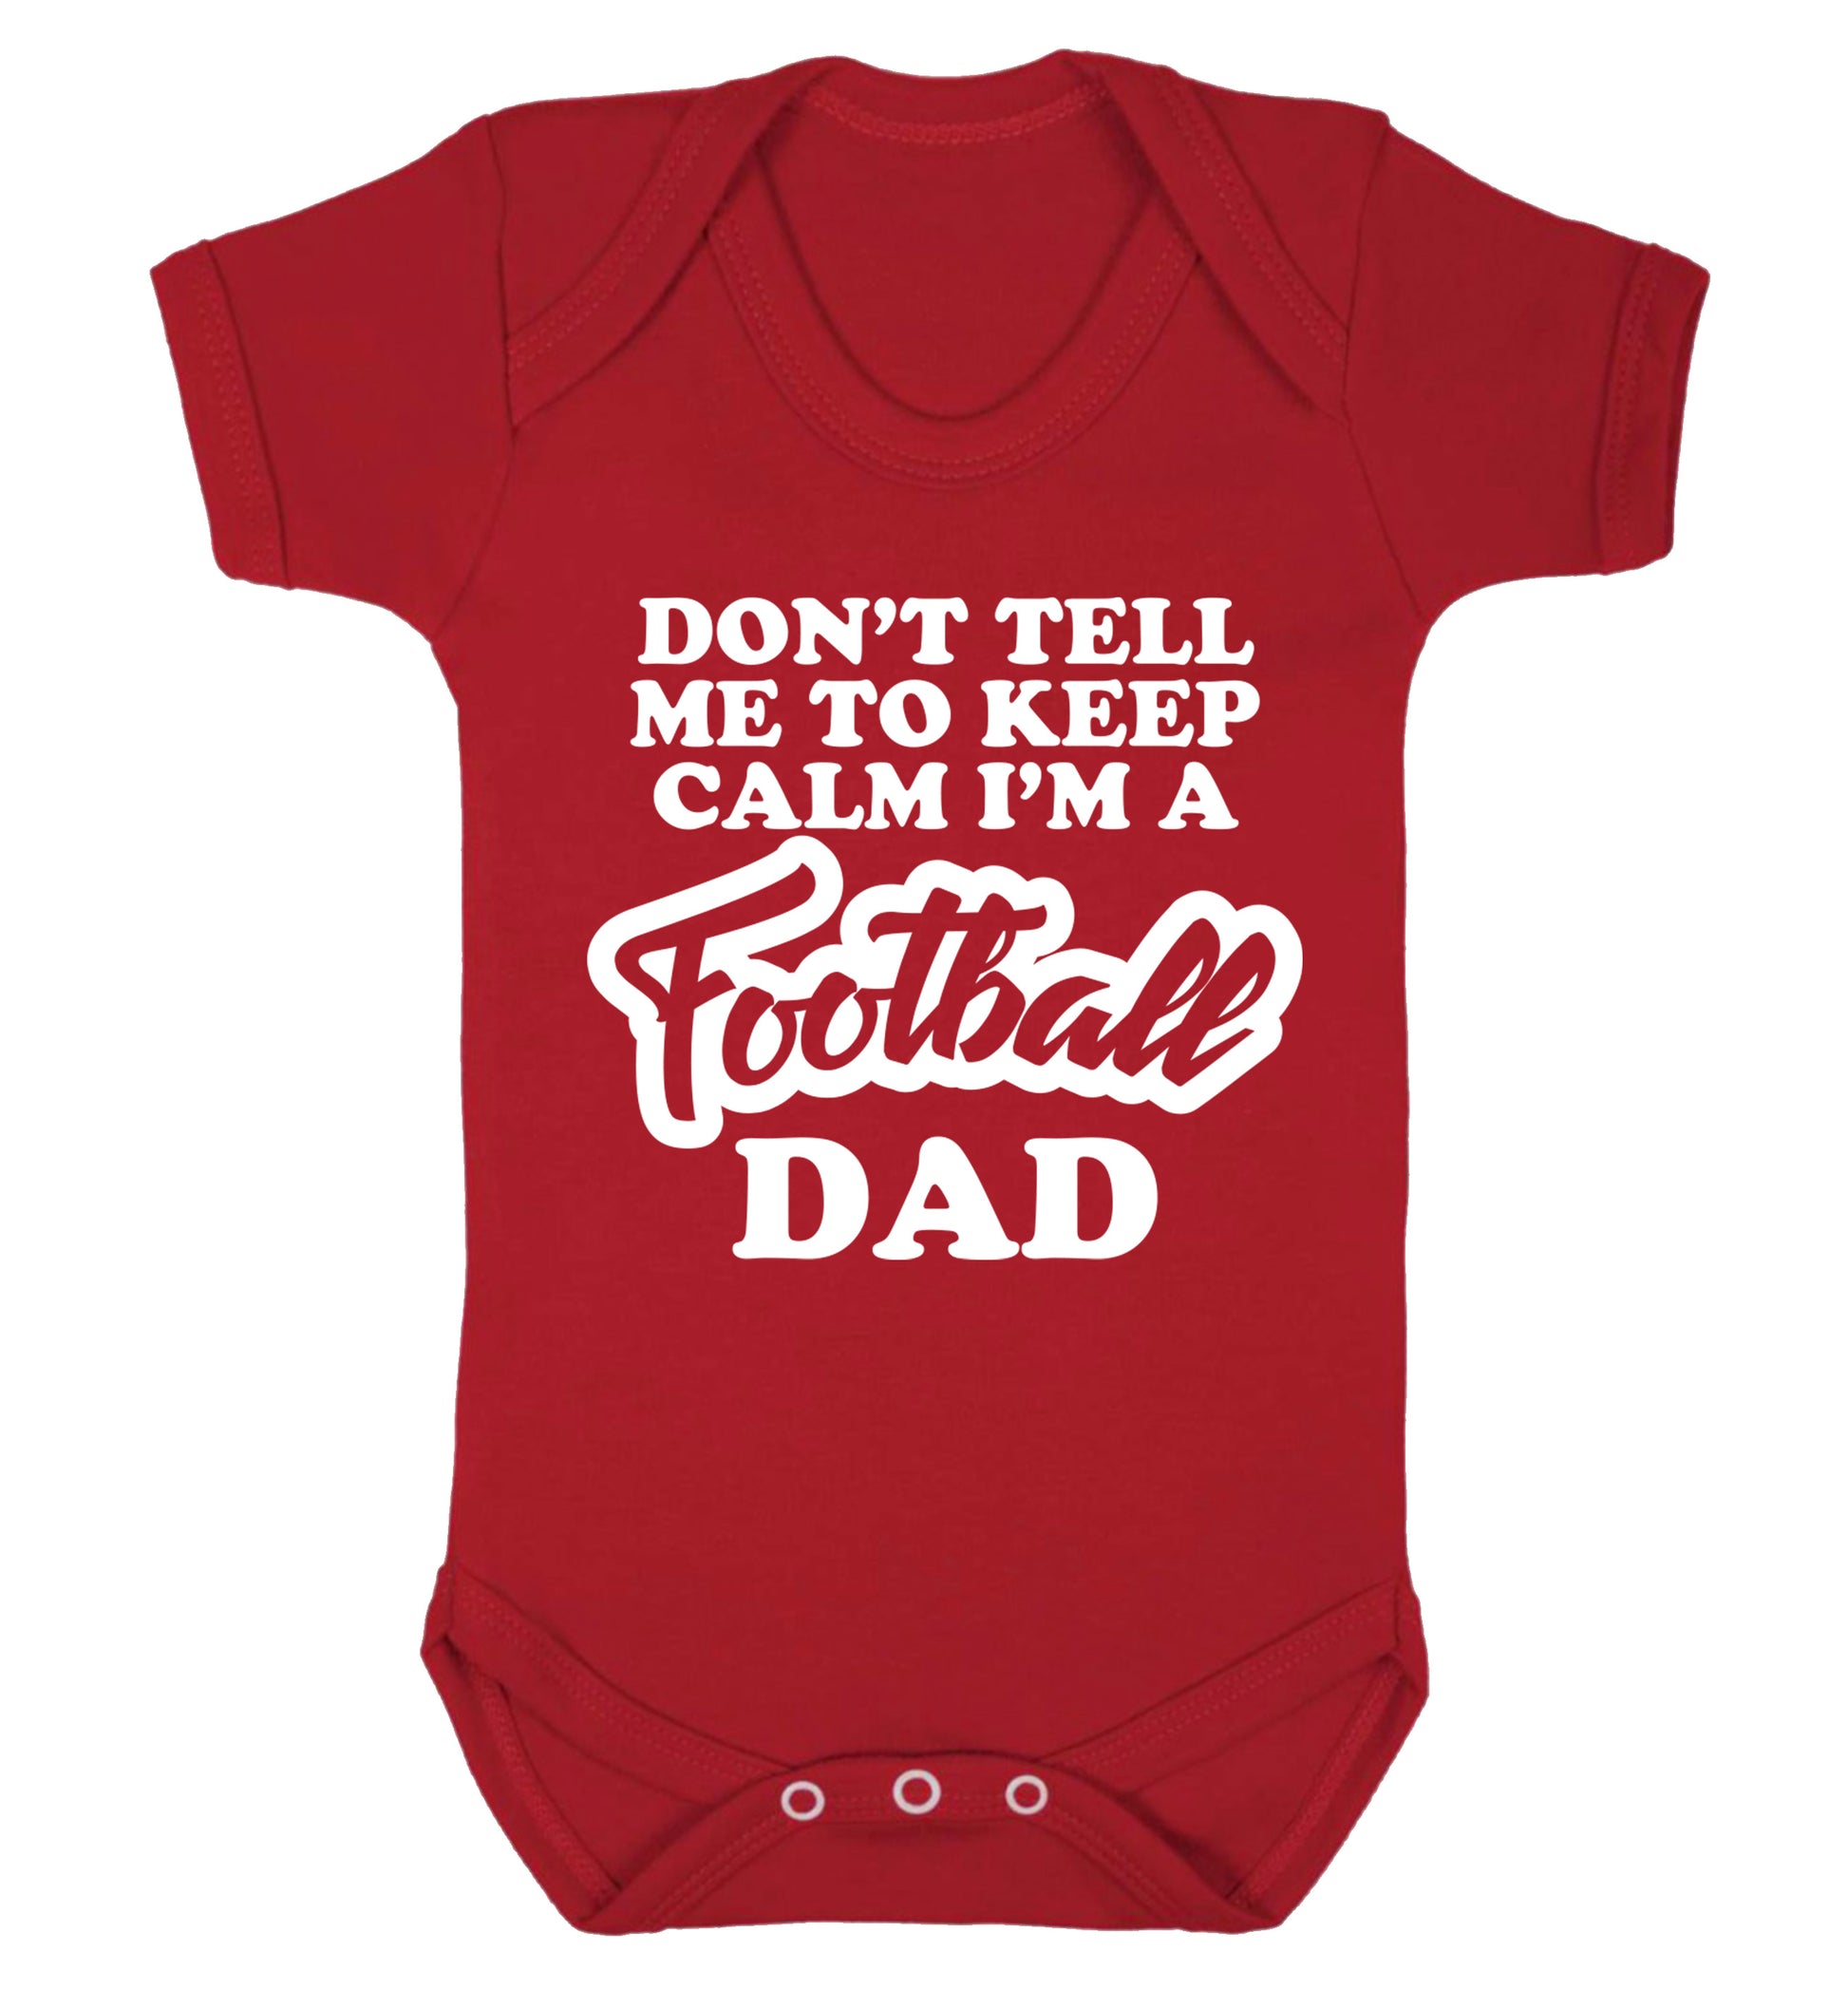 Don't tell me to keep calm I'm a football grandad Baby Vest red 18-24 months